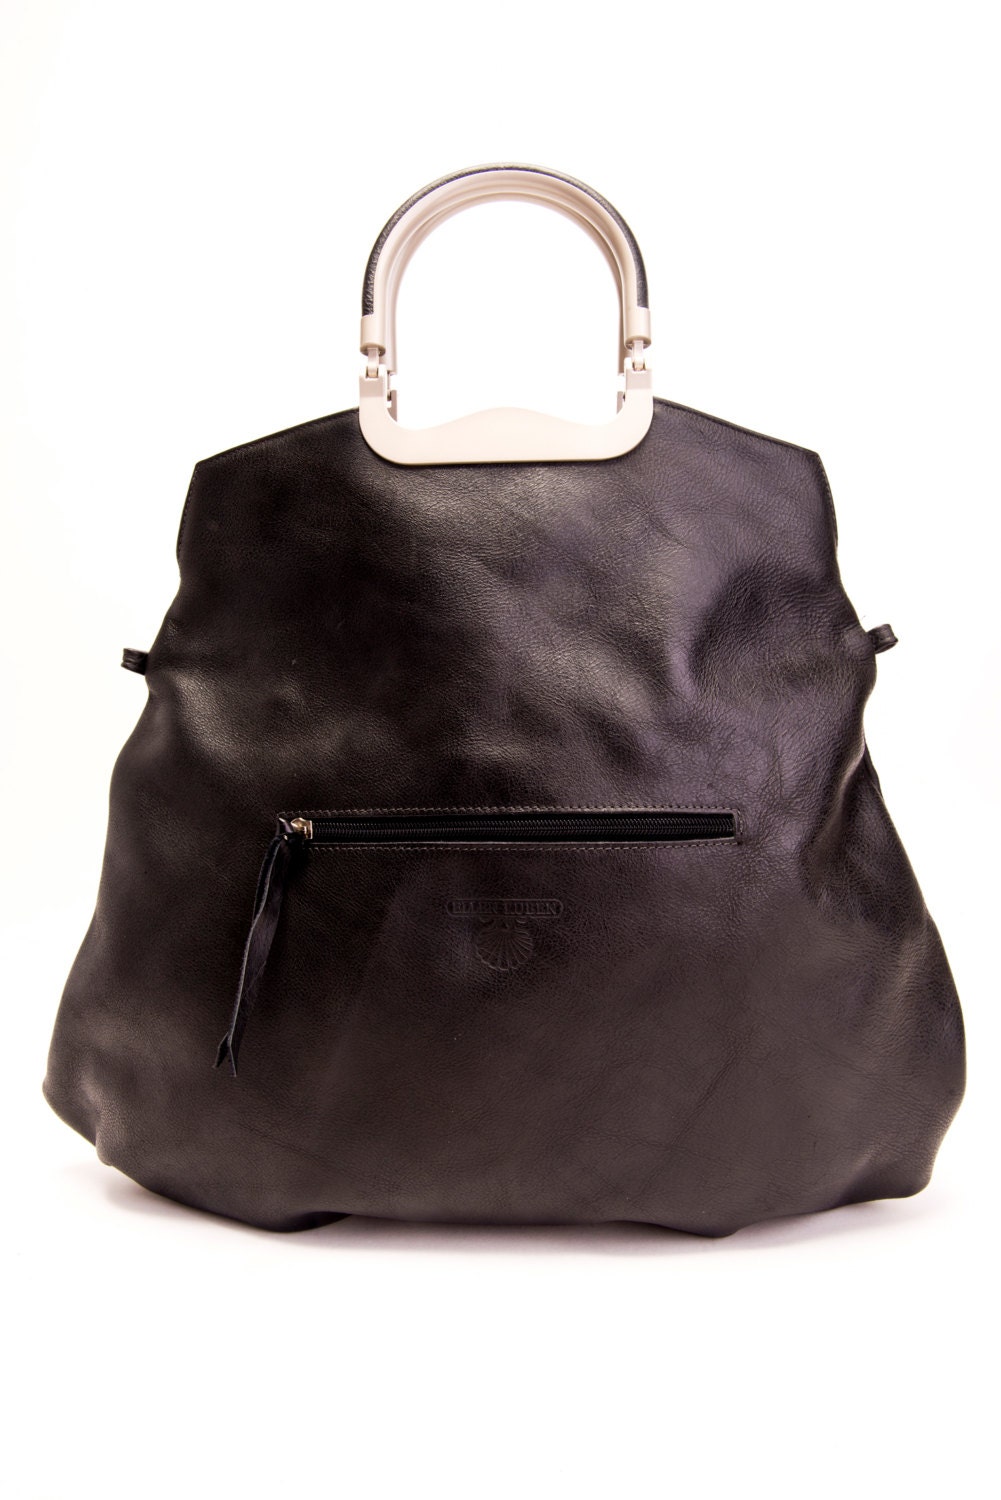 Black Leather Tote Bag / Women Leather by EllenRubenBagsShoes